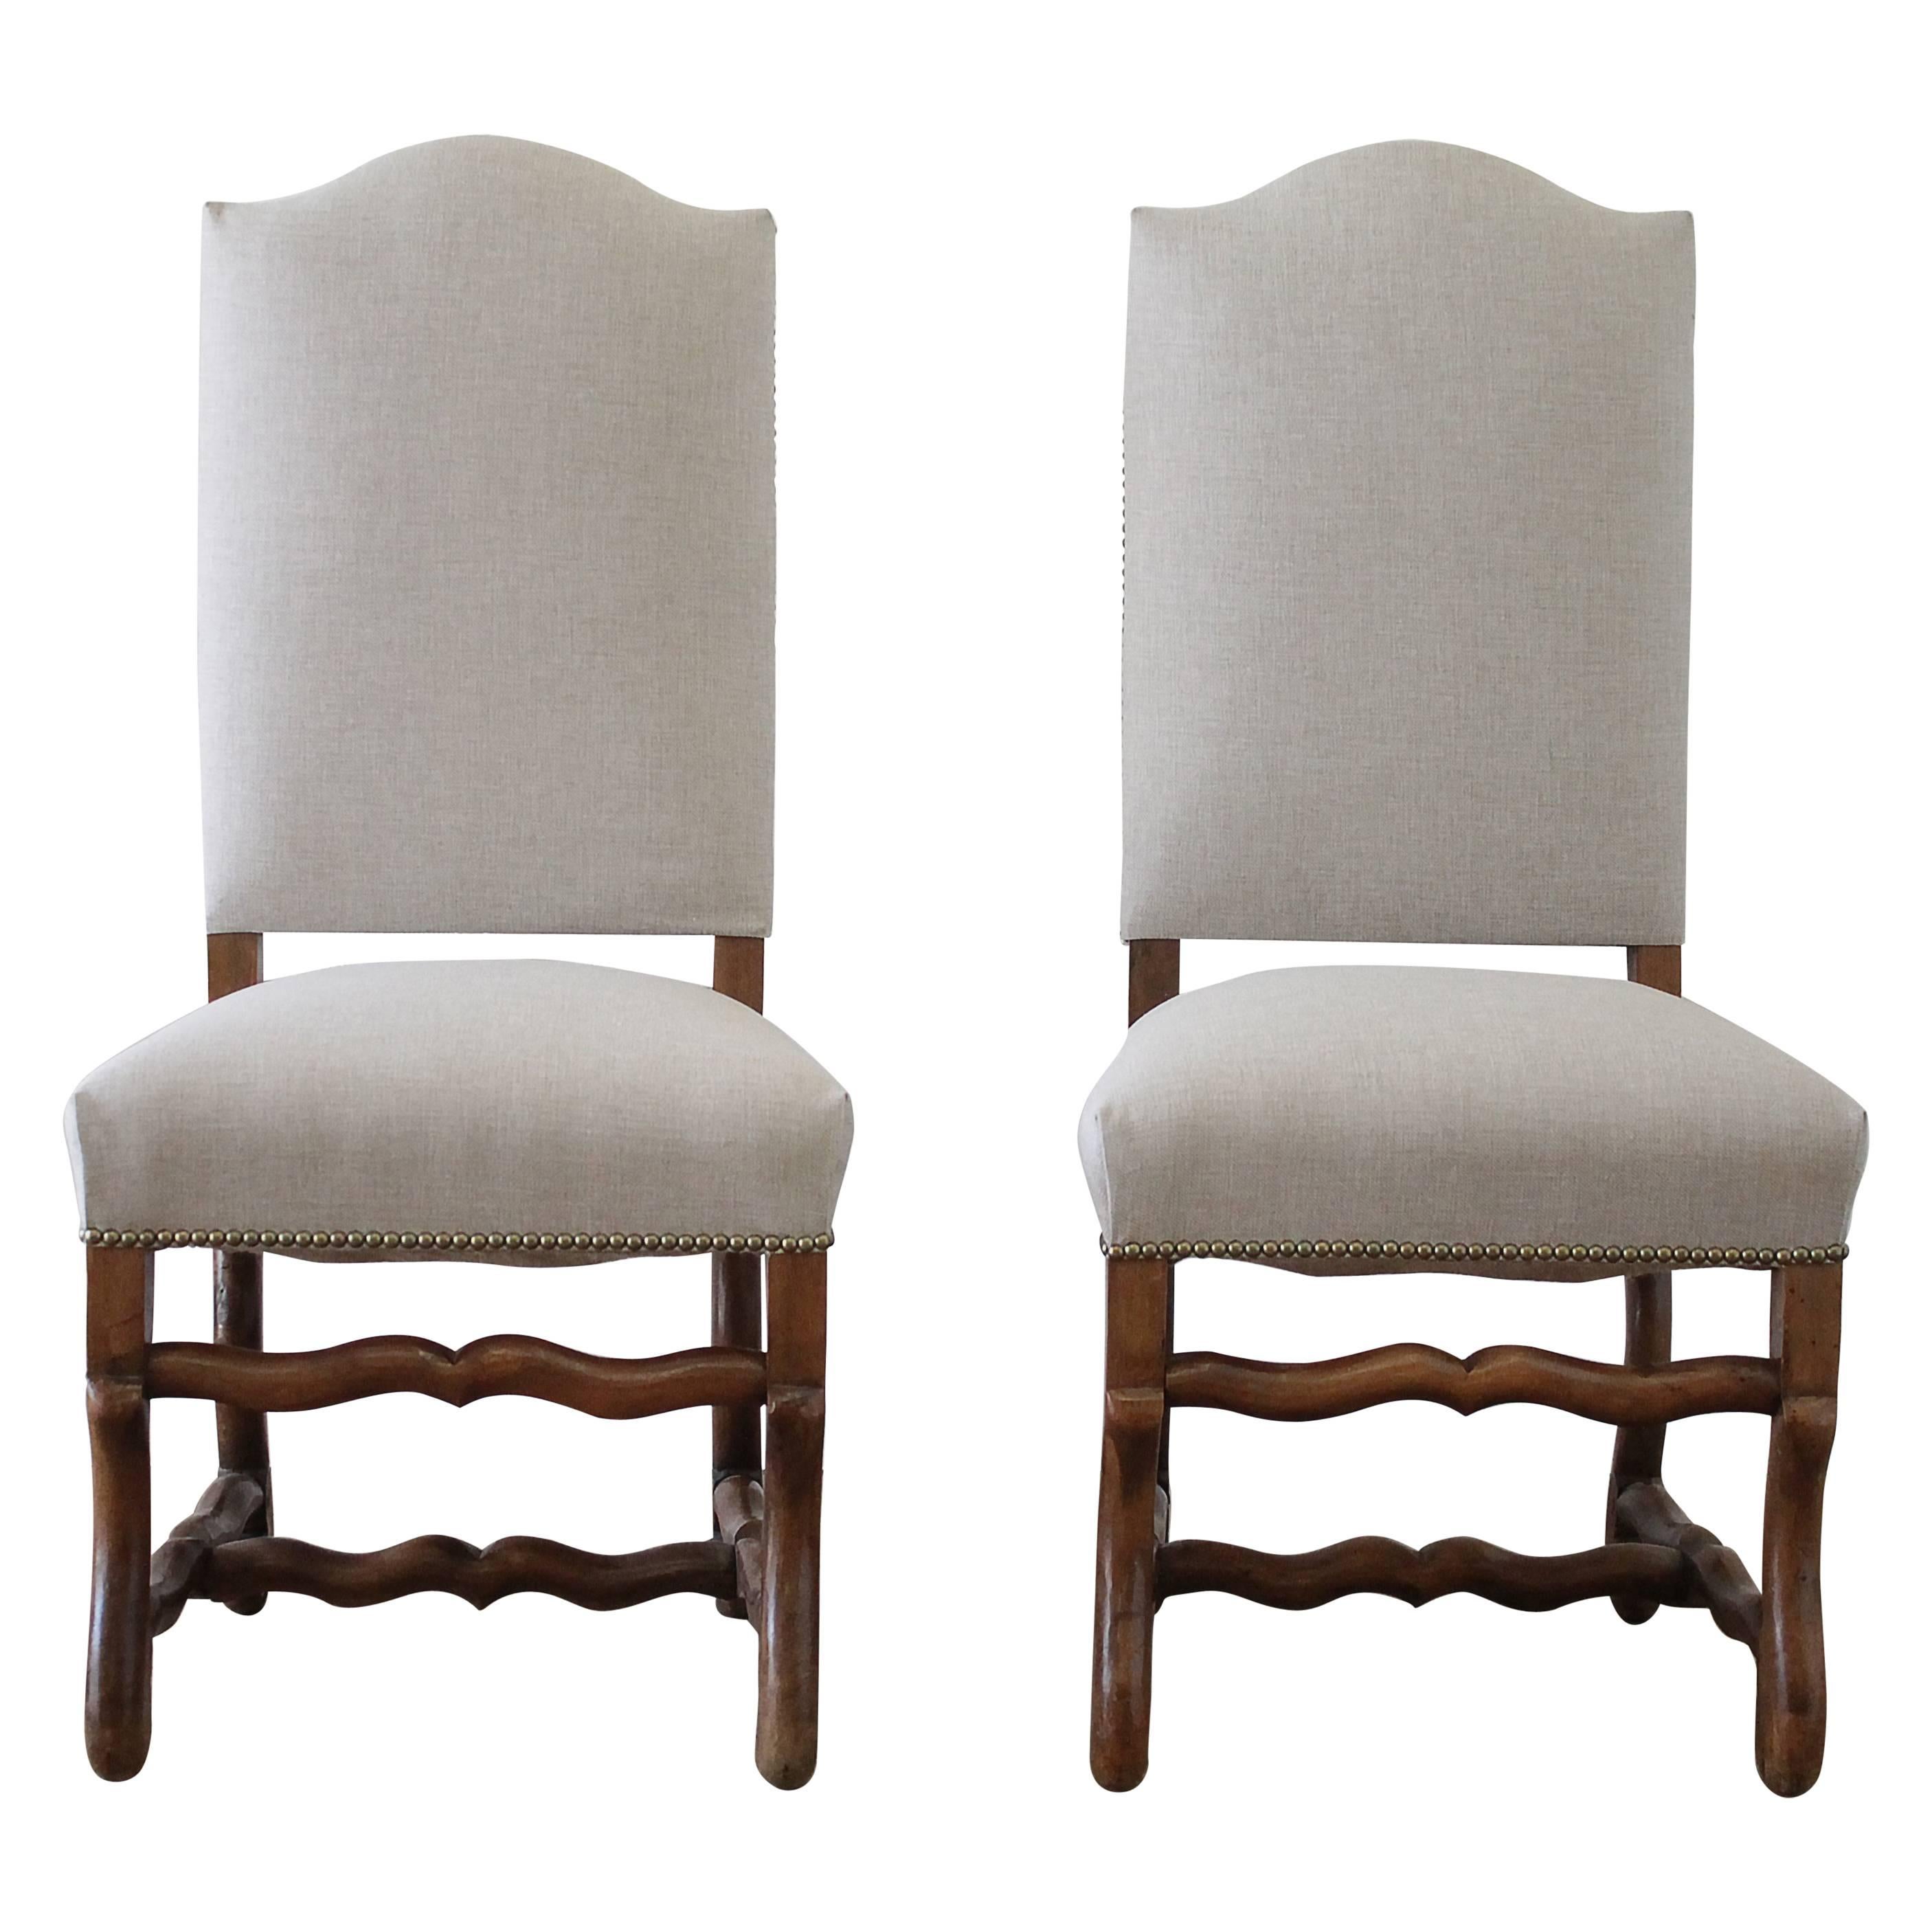 Set of Four Antique Renaissance Style Dining Chairs in Natural Linen